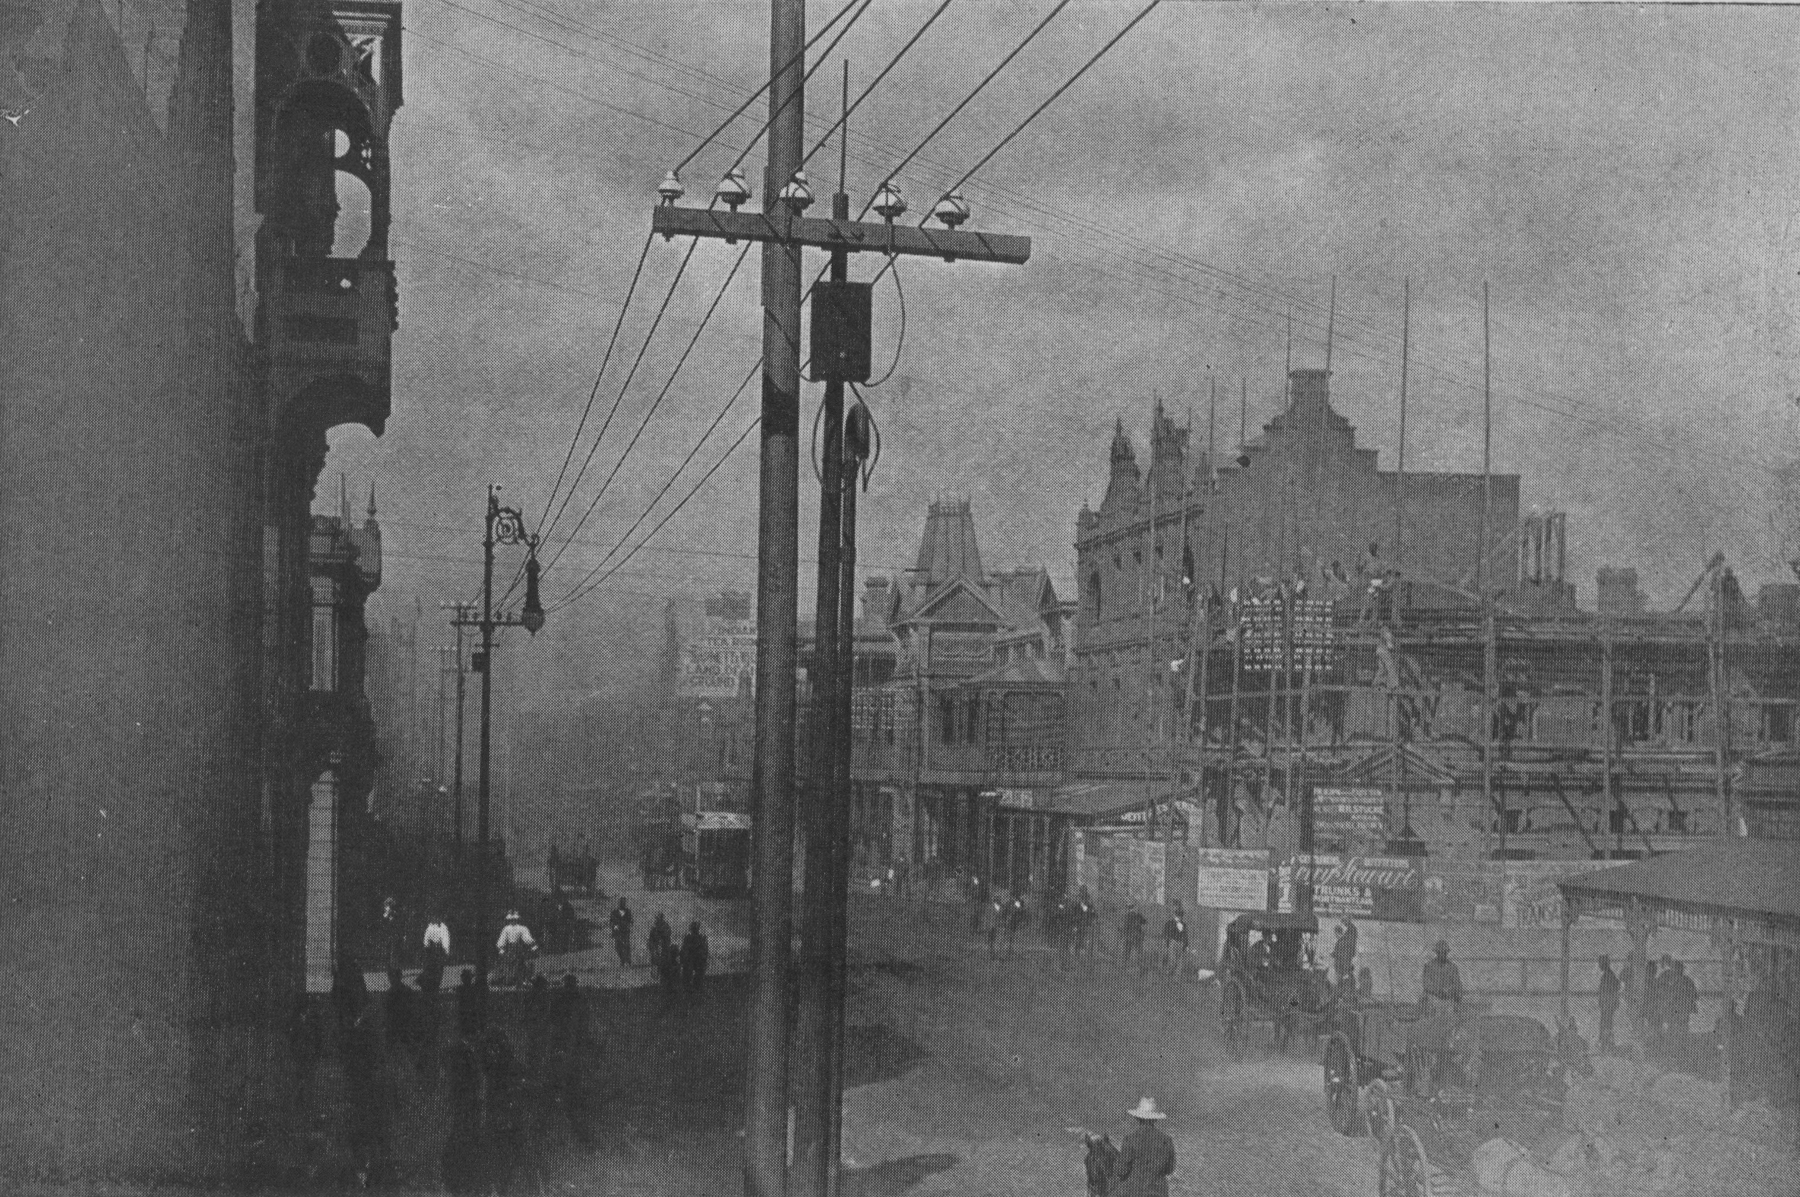 dust storm in city street with telephone poles and early cars